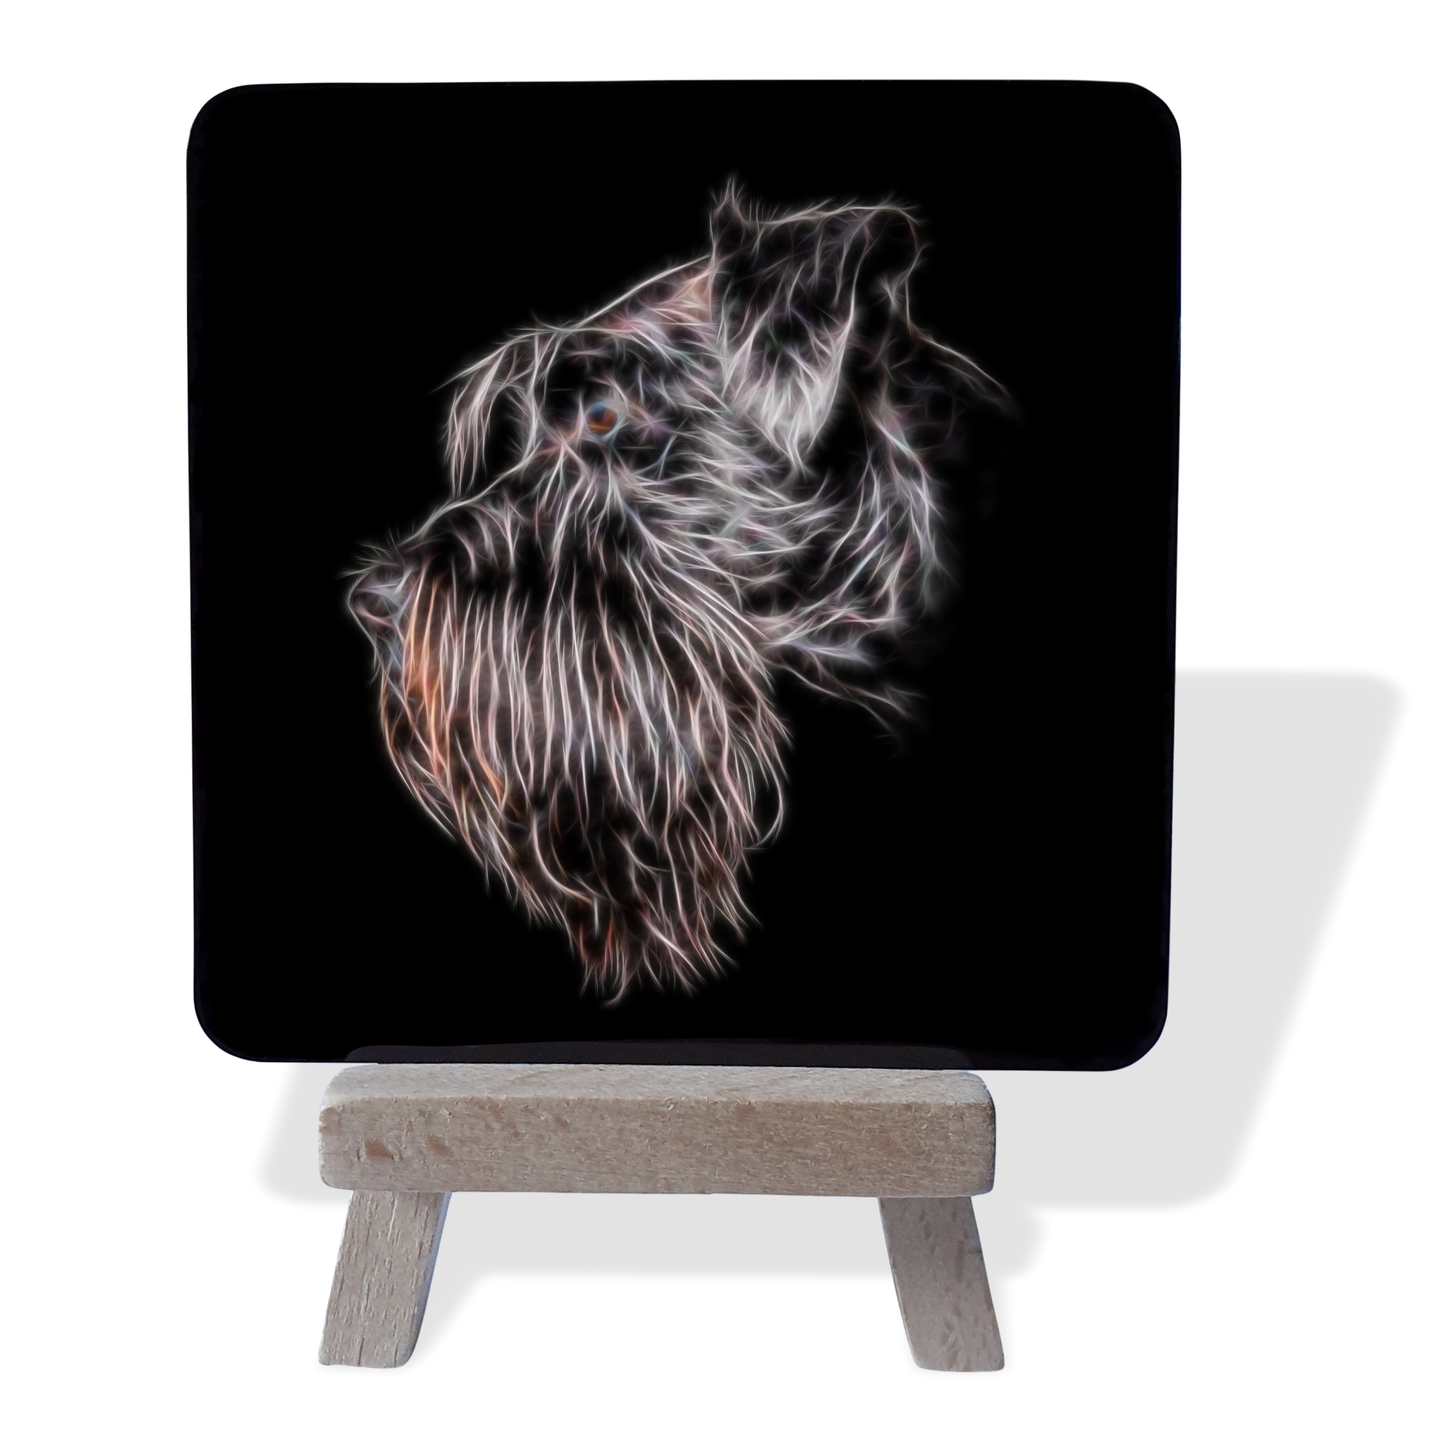 Black Schnauzer #1 Metal Plaque and Mini Easel with Fractal Art Design